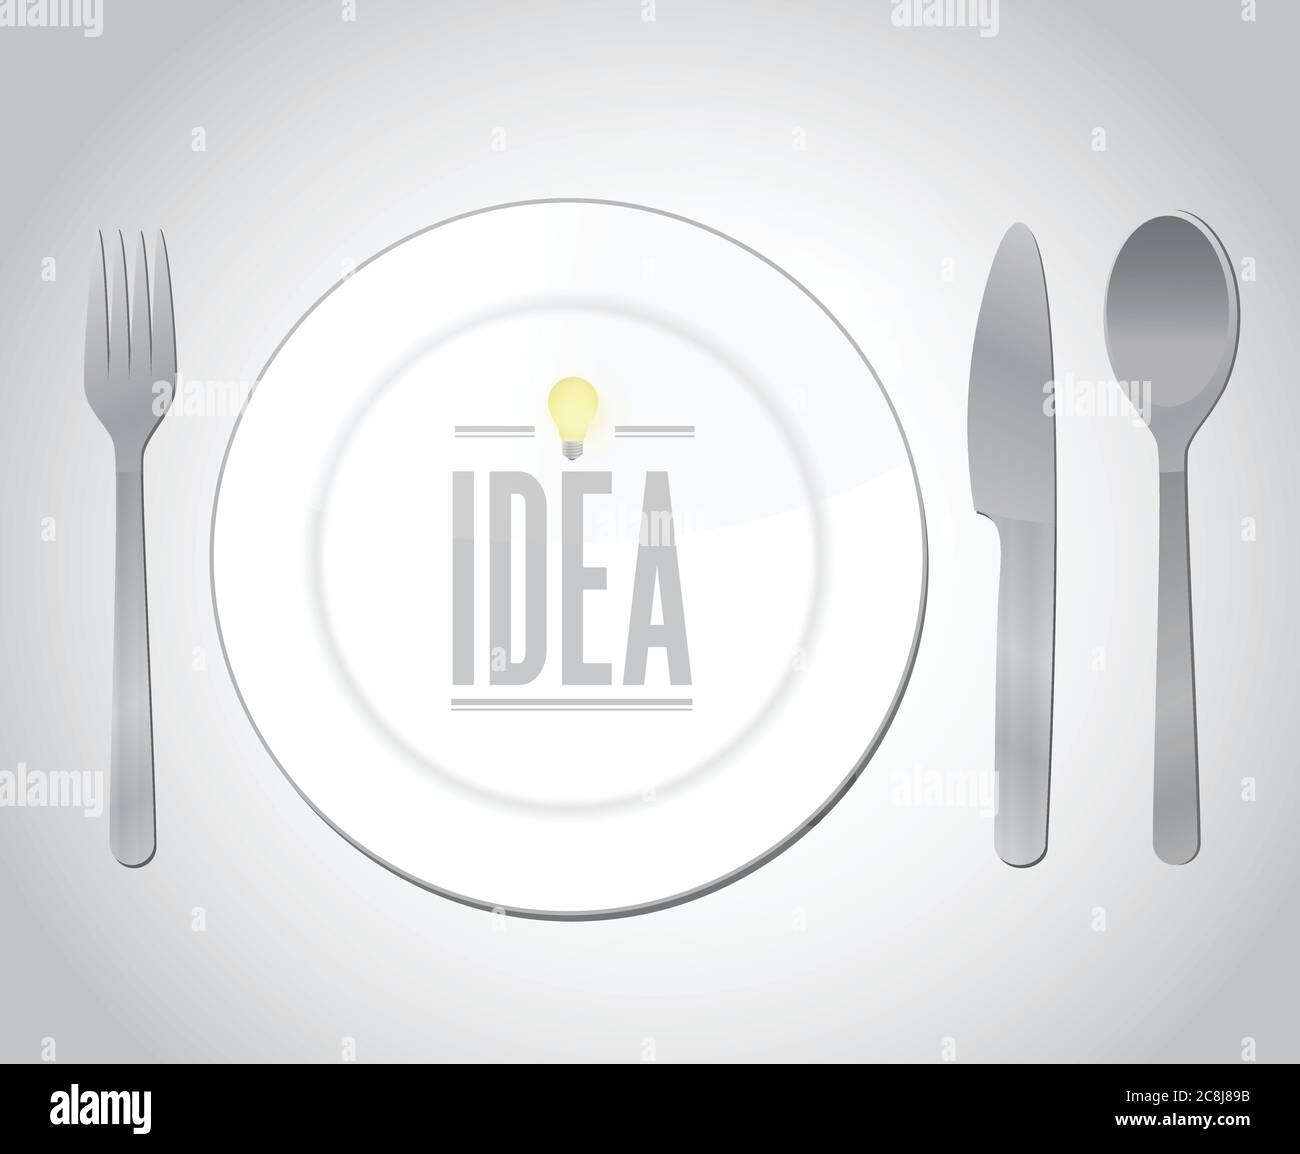 Eating great ideas illustration design over a white background Stock Vector